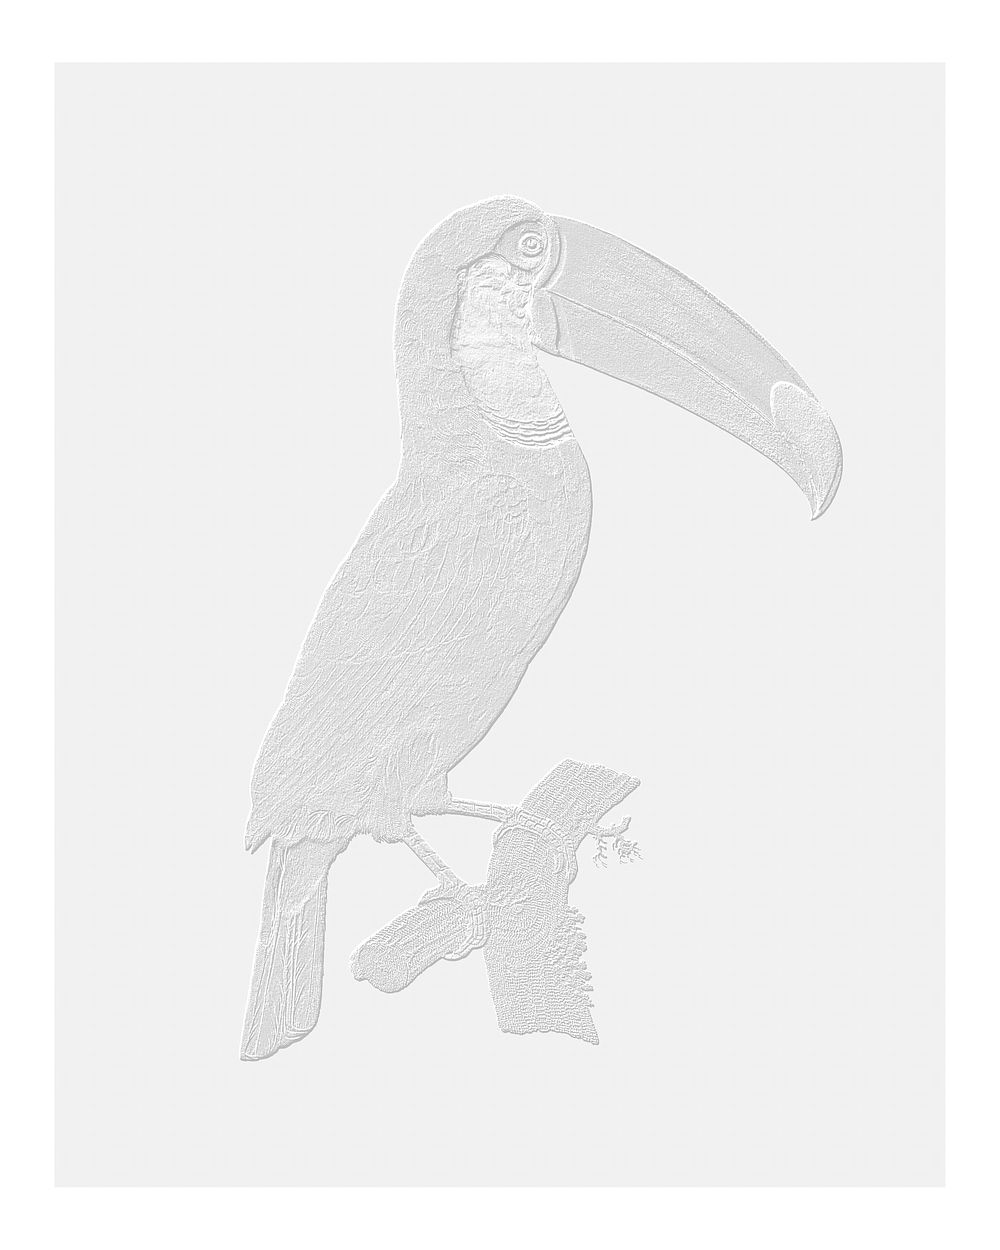 Vintage Toco toucan illustration wall art print and poster design remix from original artwork.